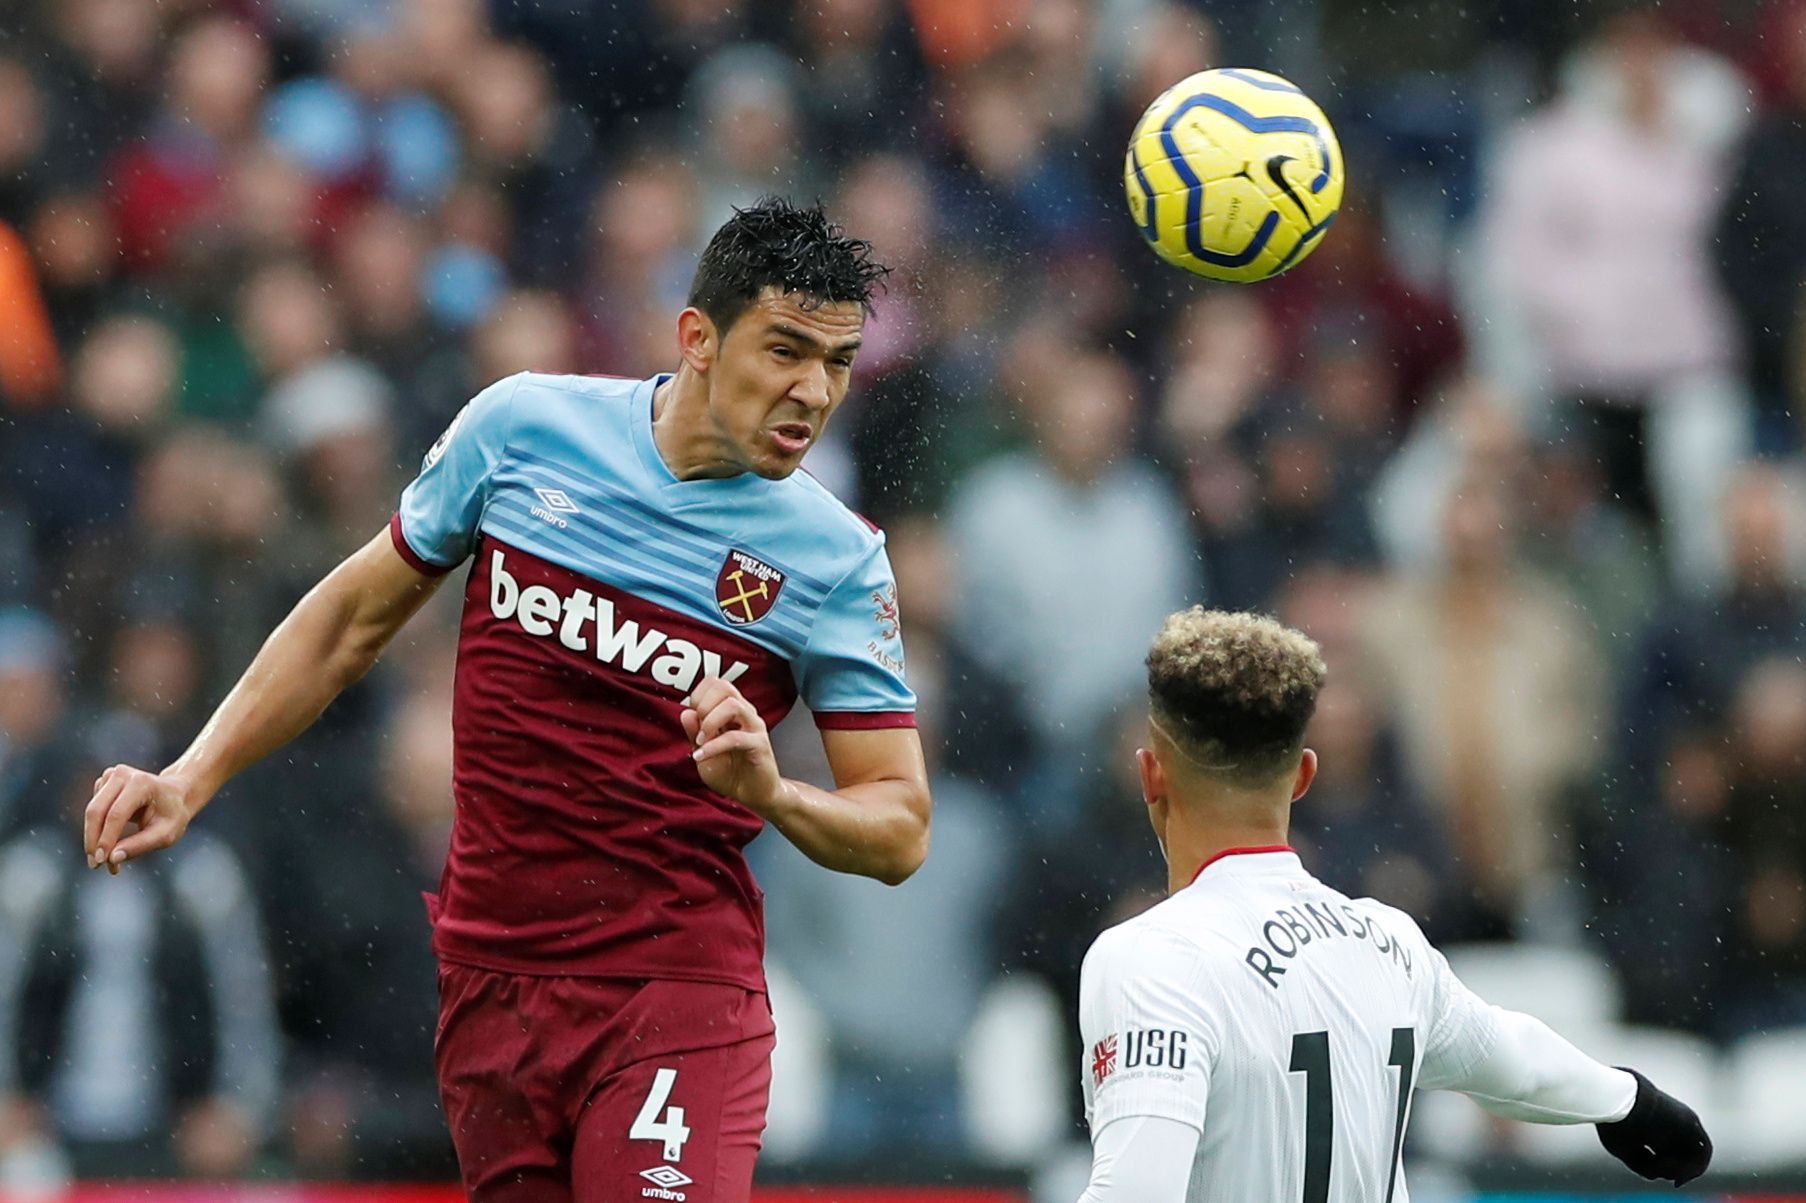 Soccer Football - Premier League - West Ham United v Sheffield United - London Stadium, London, Britain - October 26, 2019  West Ham United's Fabian Balbuena in action with Sheffield United's Callum Robinson   Action Images via Reuters/Paul Childs  EDITORIAL USE ONLY. No use with unauthorized audio, video, data, fixture lists, club/league logos or 